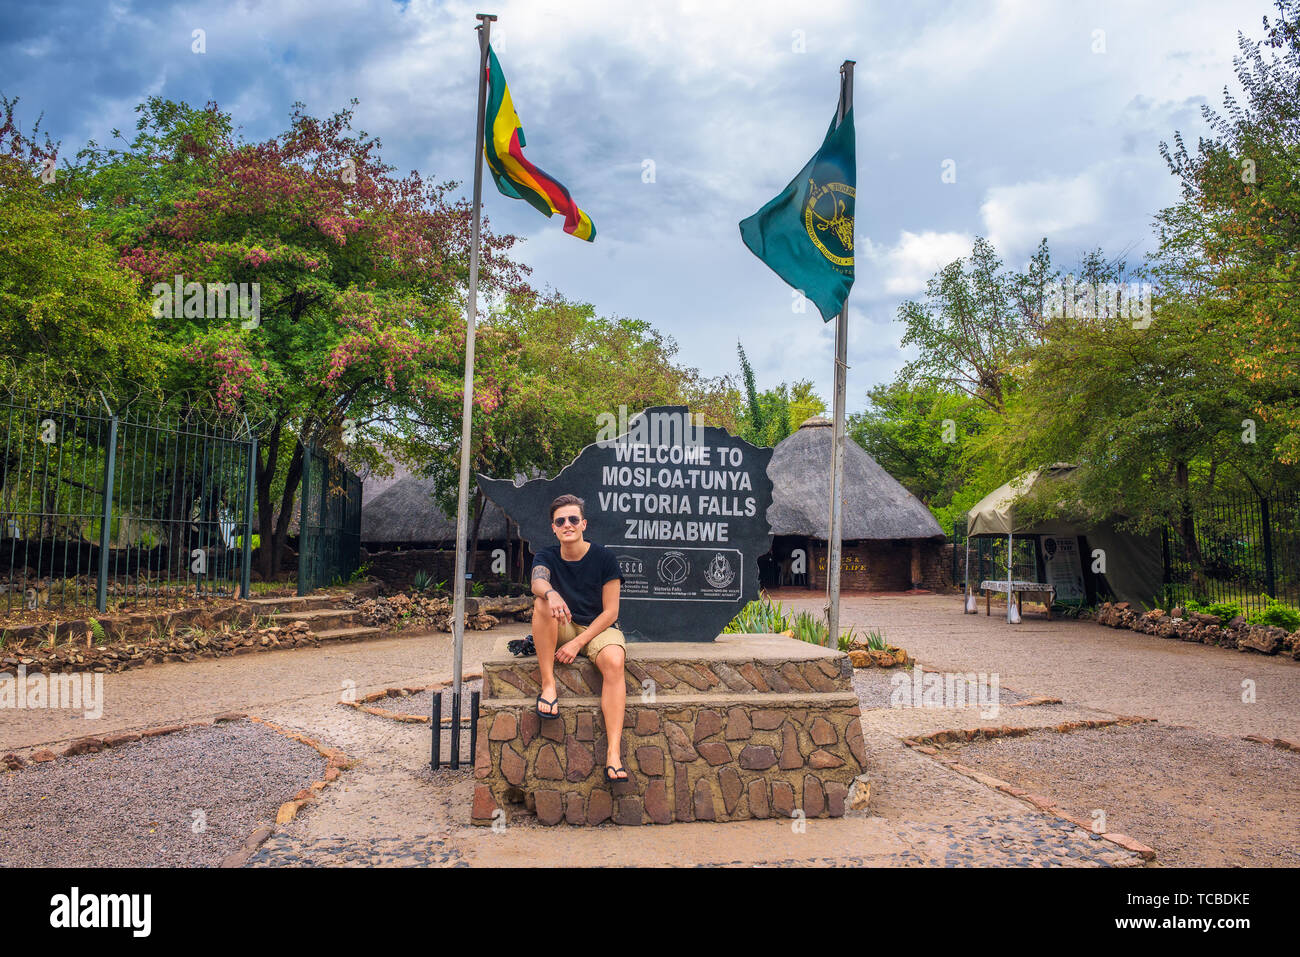 Tourist sits on the welcome sign placed at the entry of Victoria Falls, Zimbabwe Stock Photo